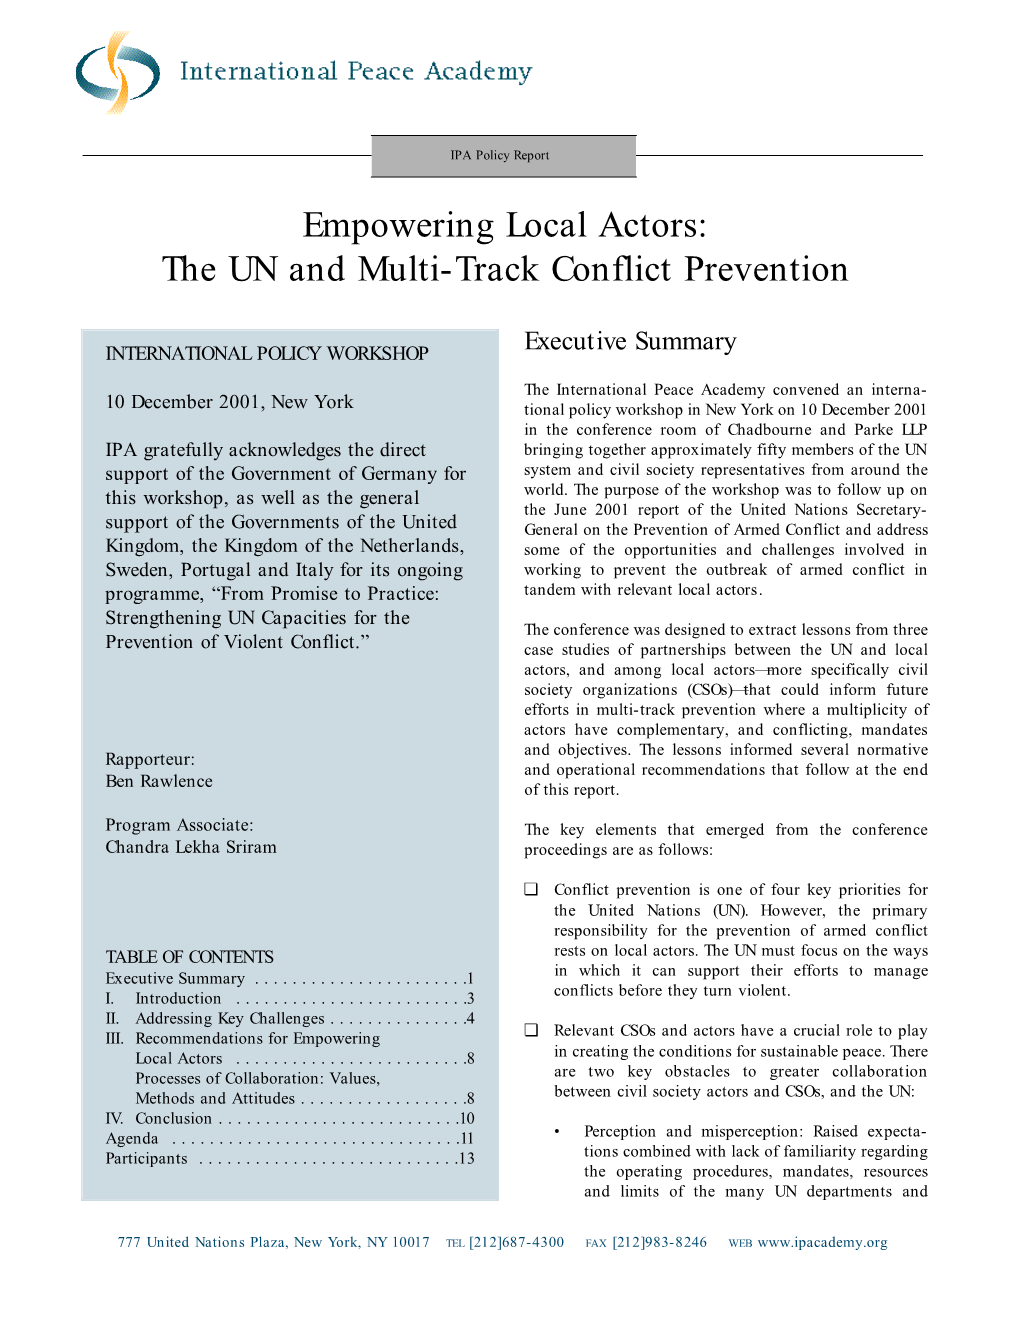 Empowering Local Actors: the UN and Multi-Track Conflict Prevention